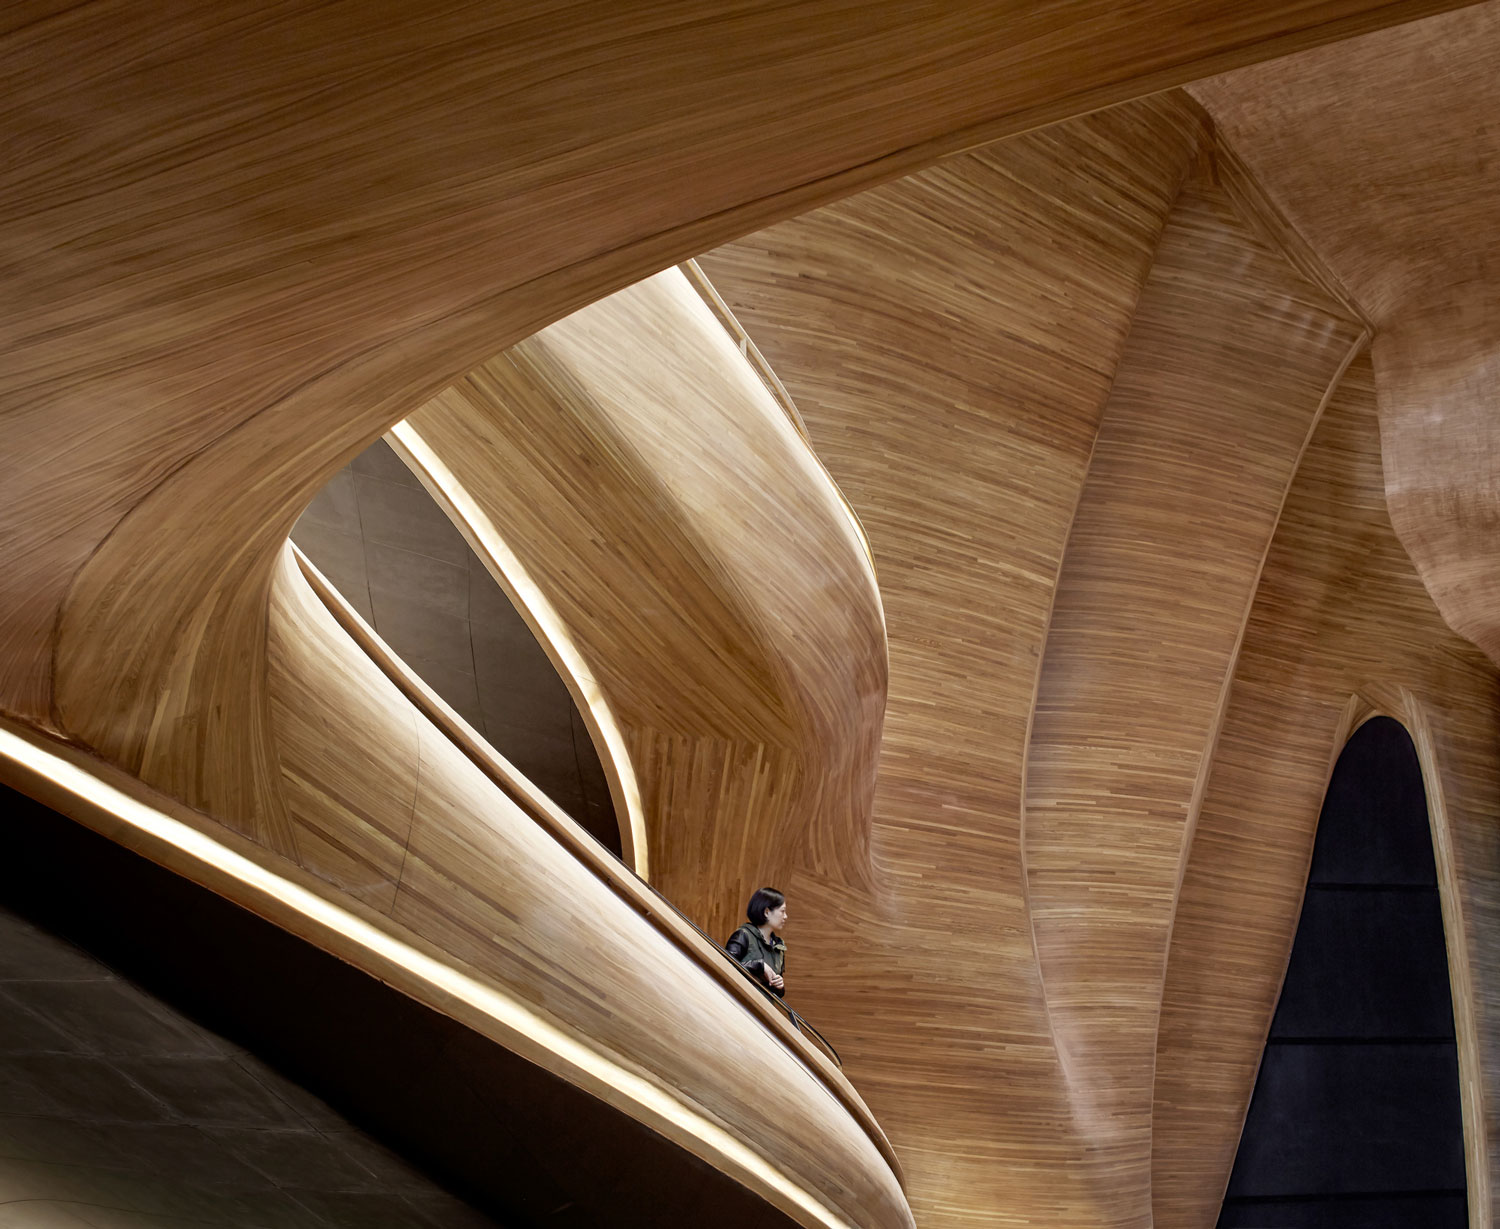 Curvy wooden interior of Chinese Opera House